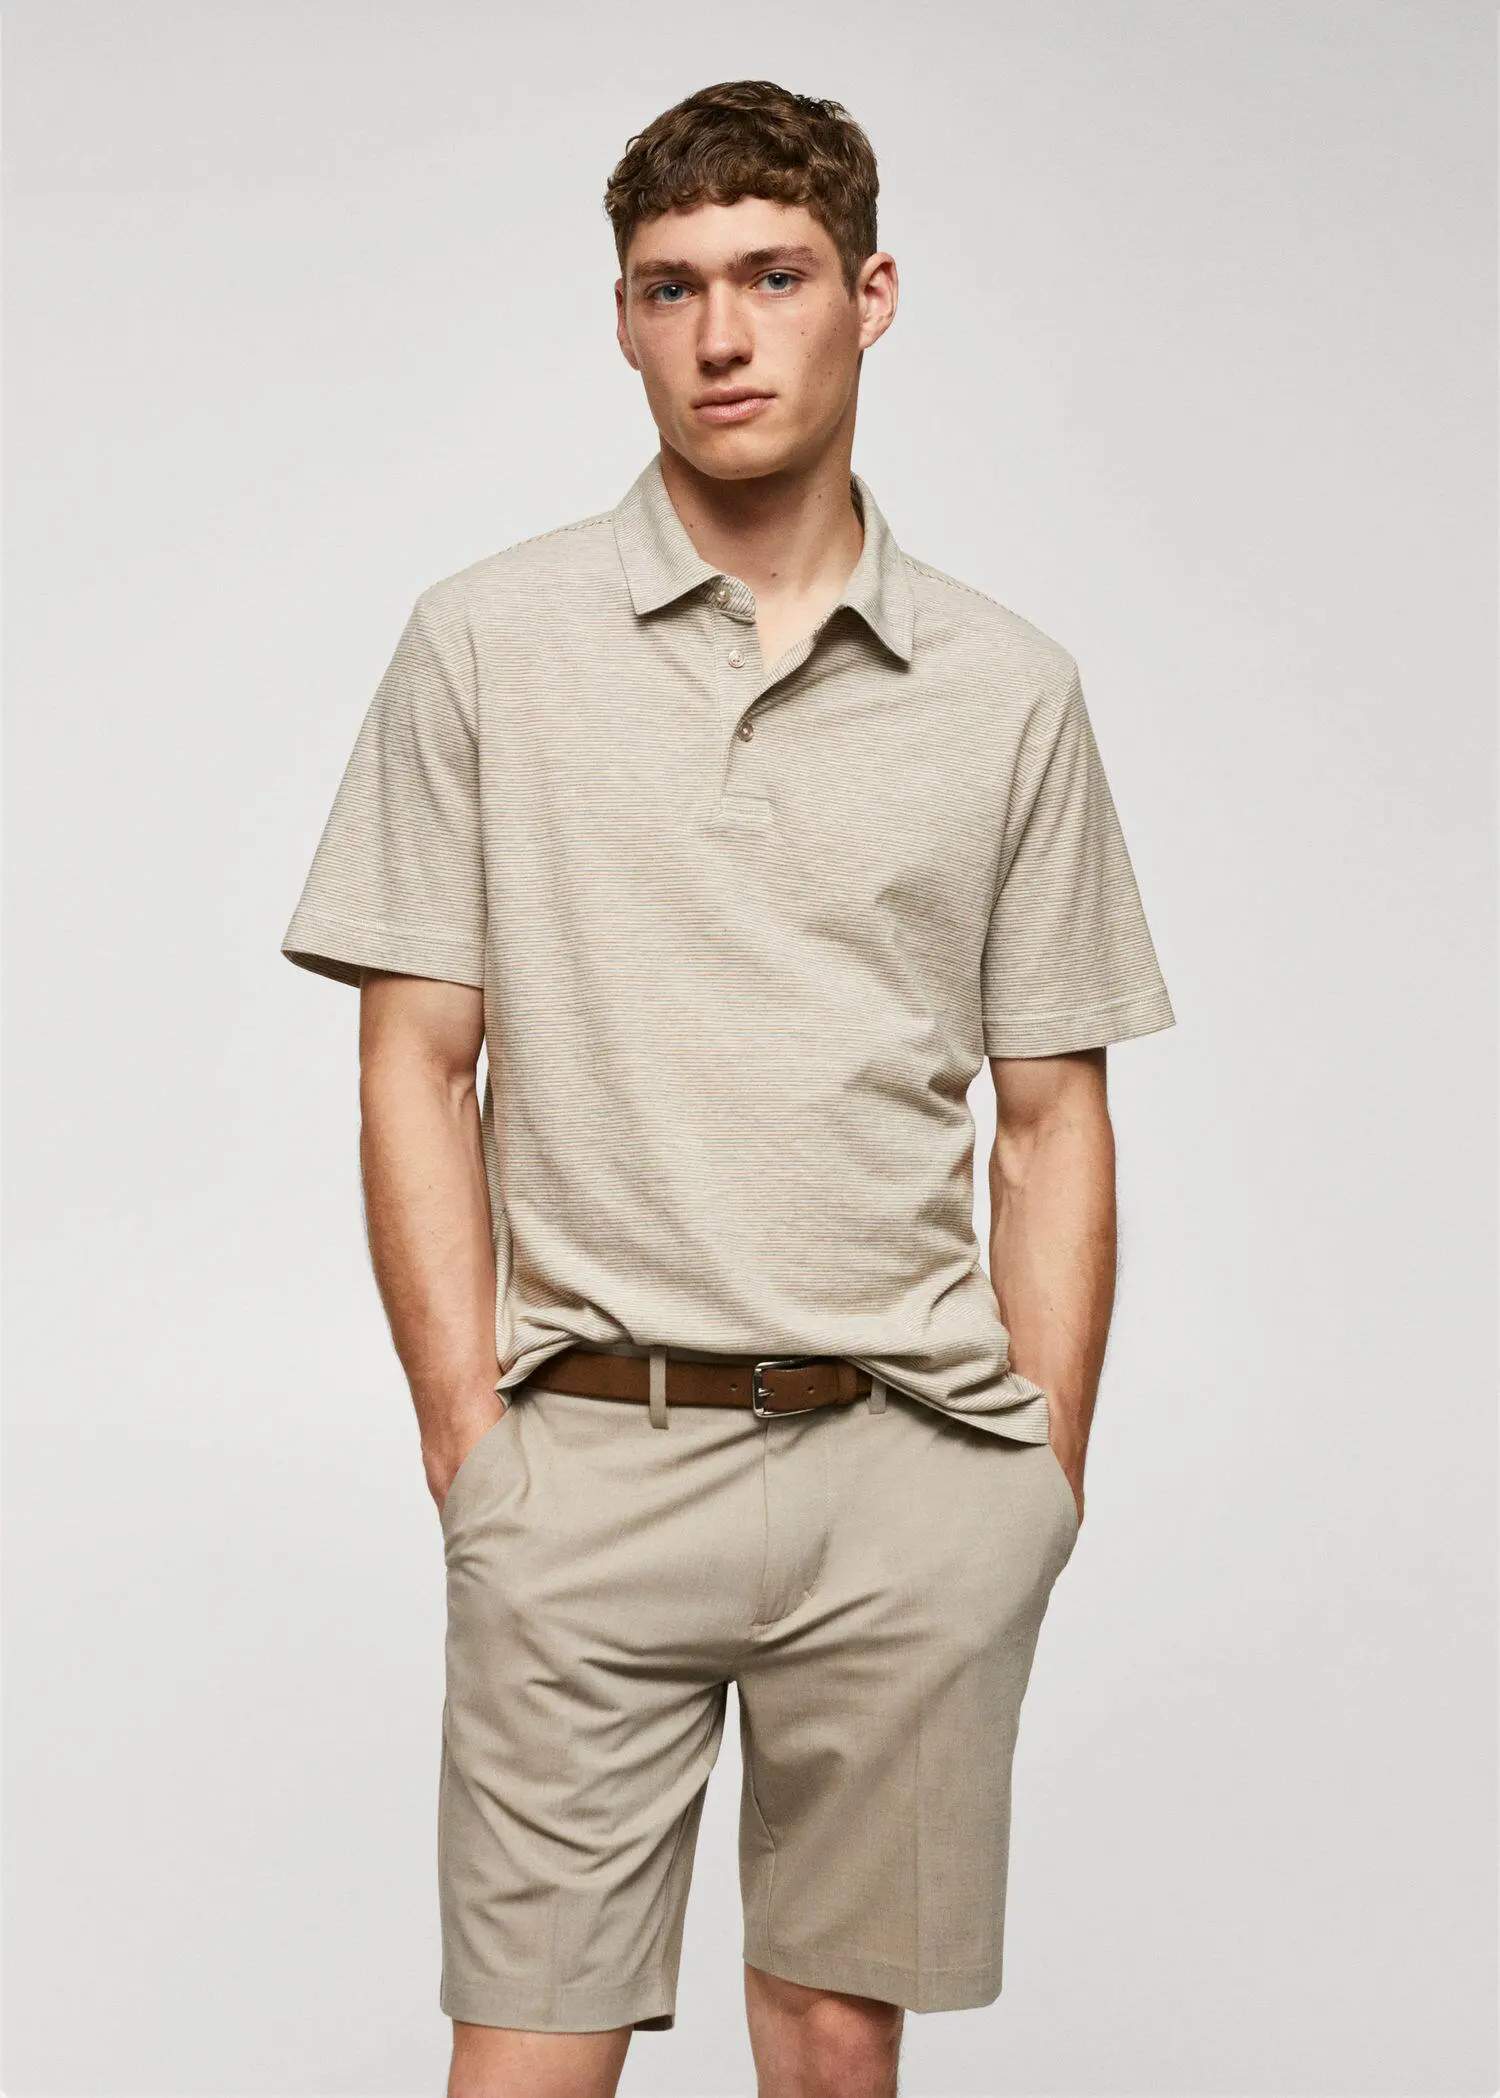 Mango 100% cotton polo shirt with striped structure. a man in a beige shirt and a brown belt. 